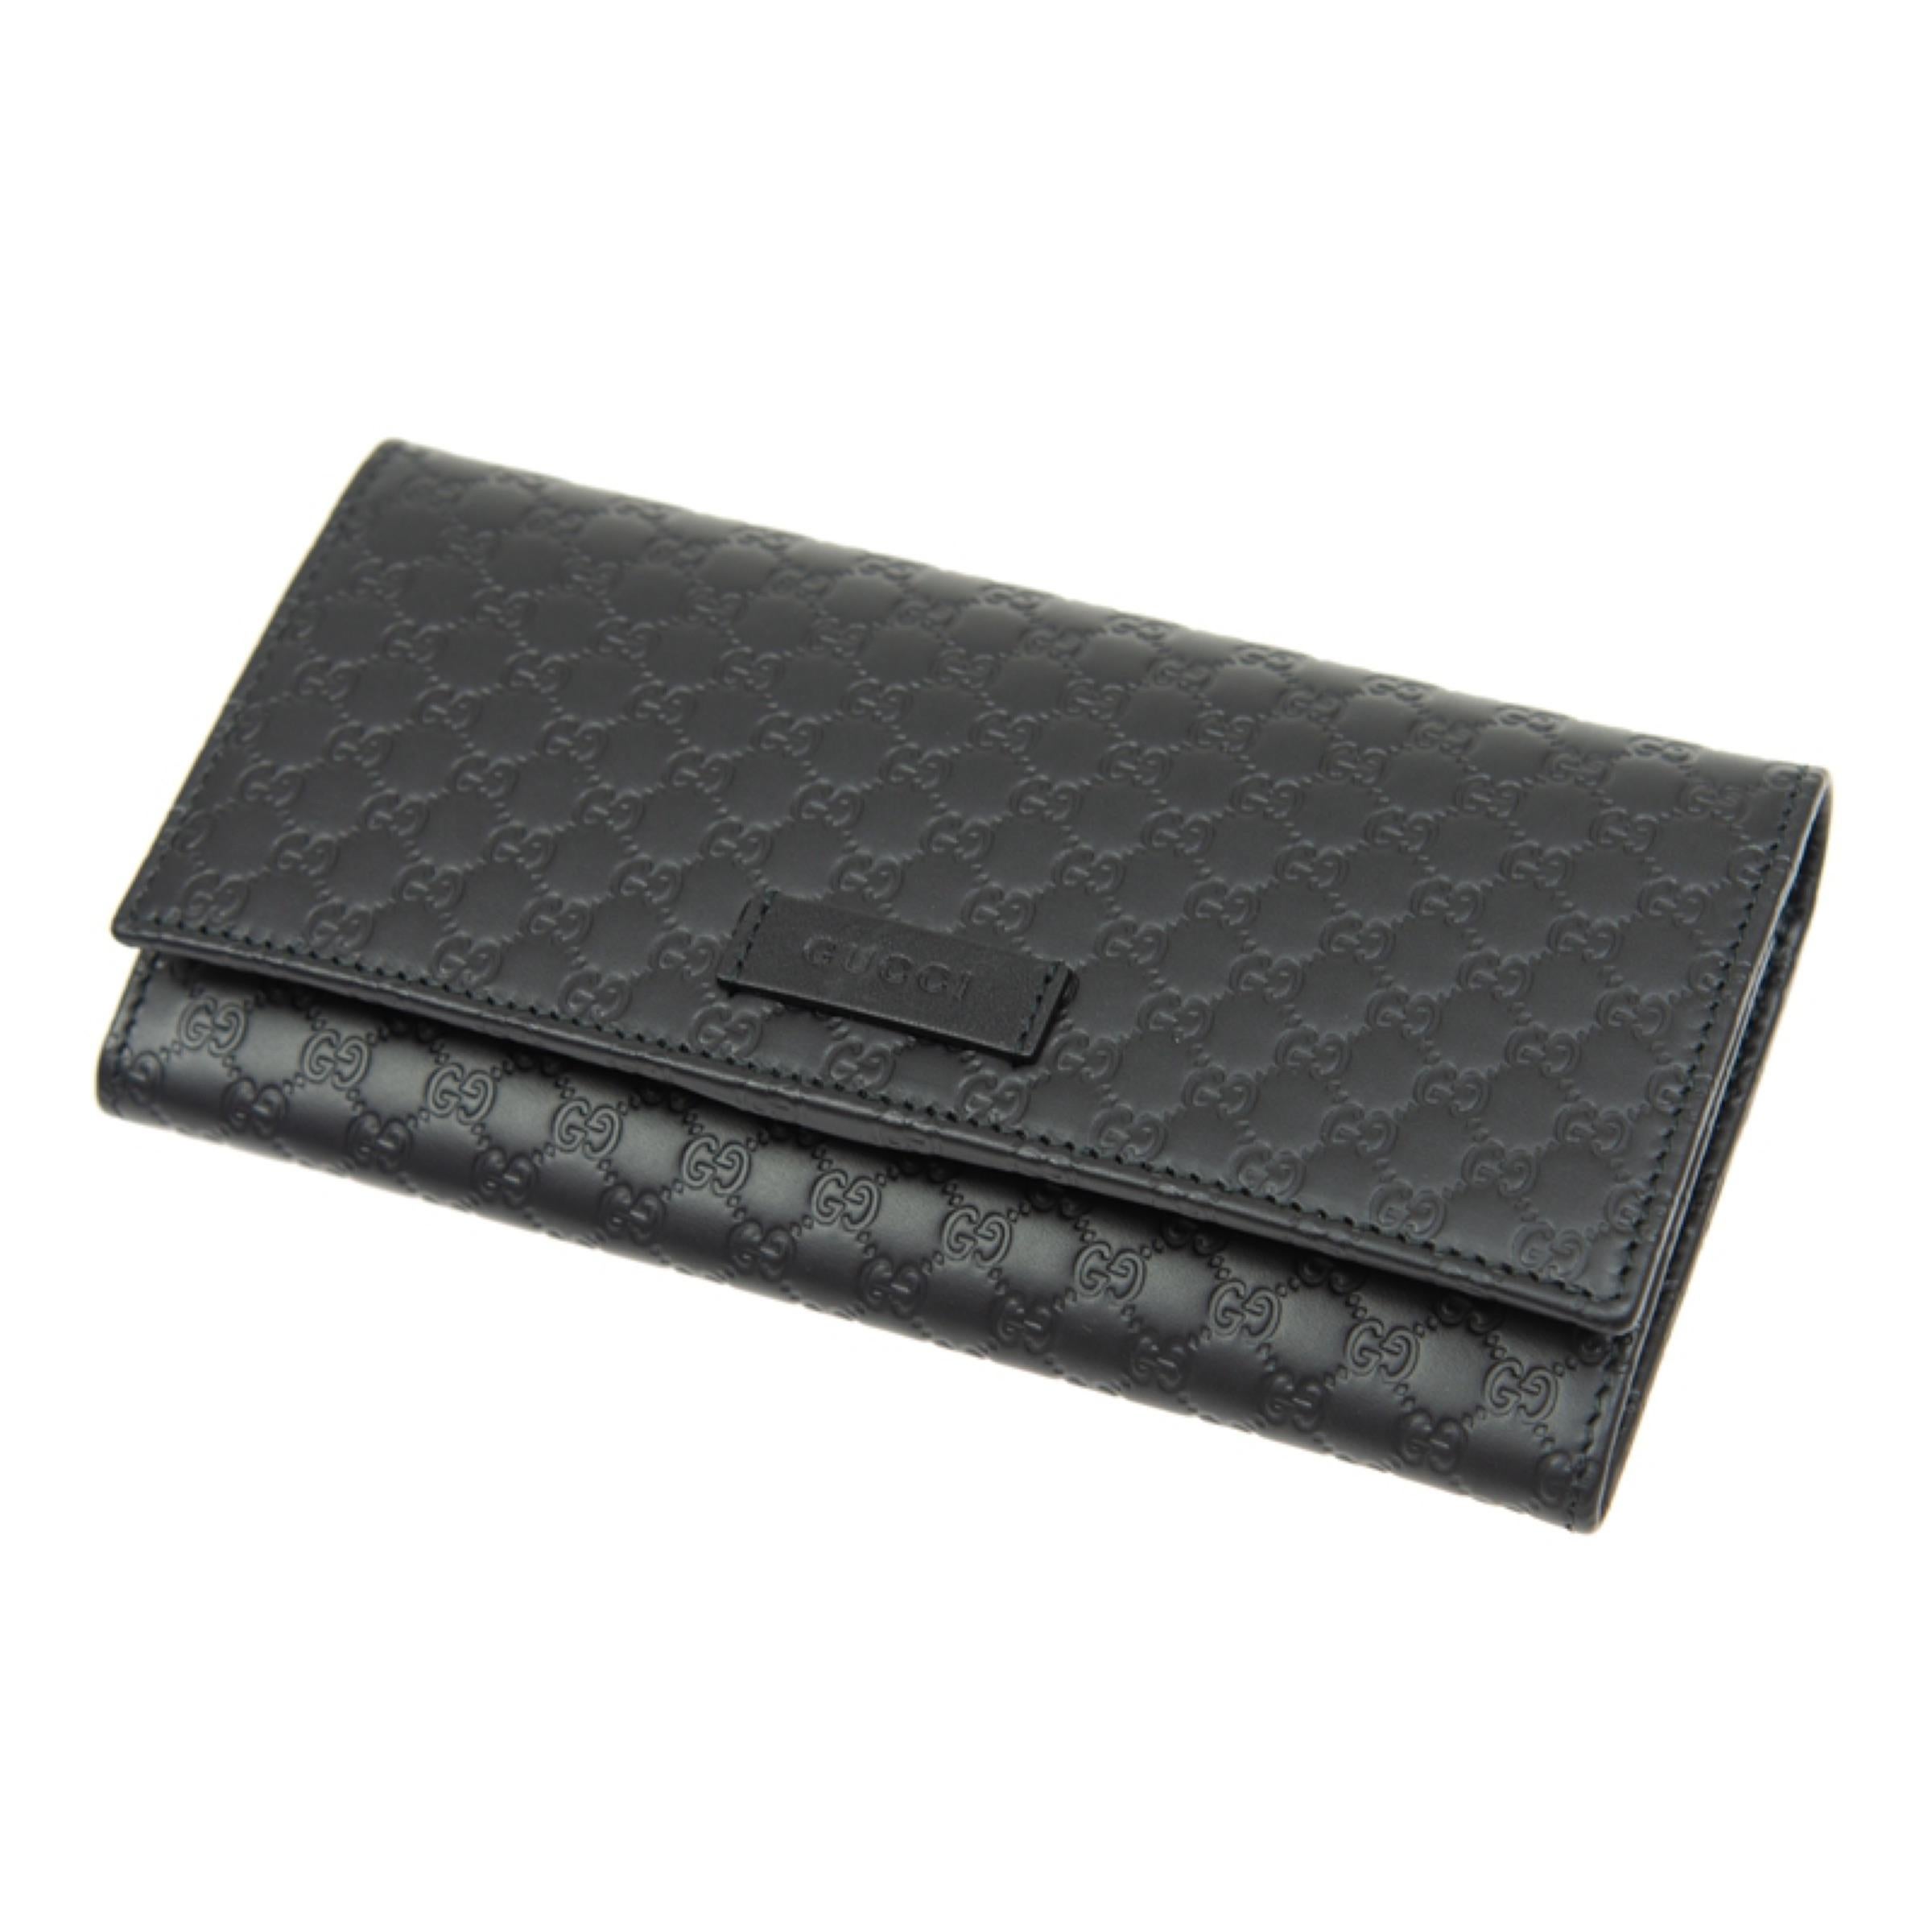 NEW Gucci Black GG Guccissima Monogram Leather Long Wallet Clutch Bag 2